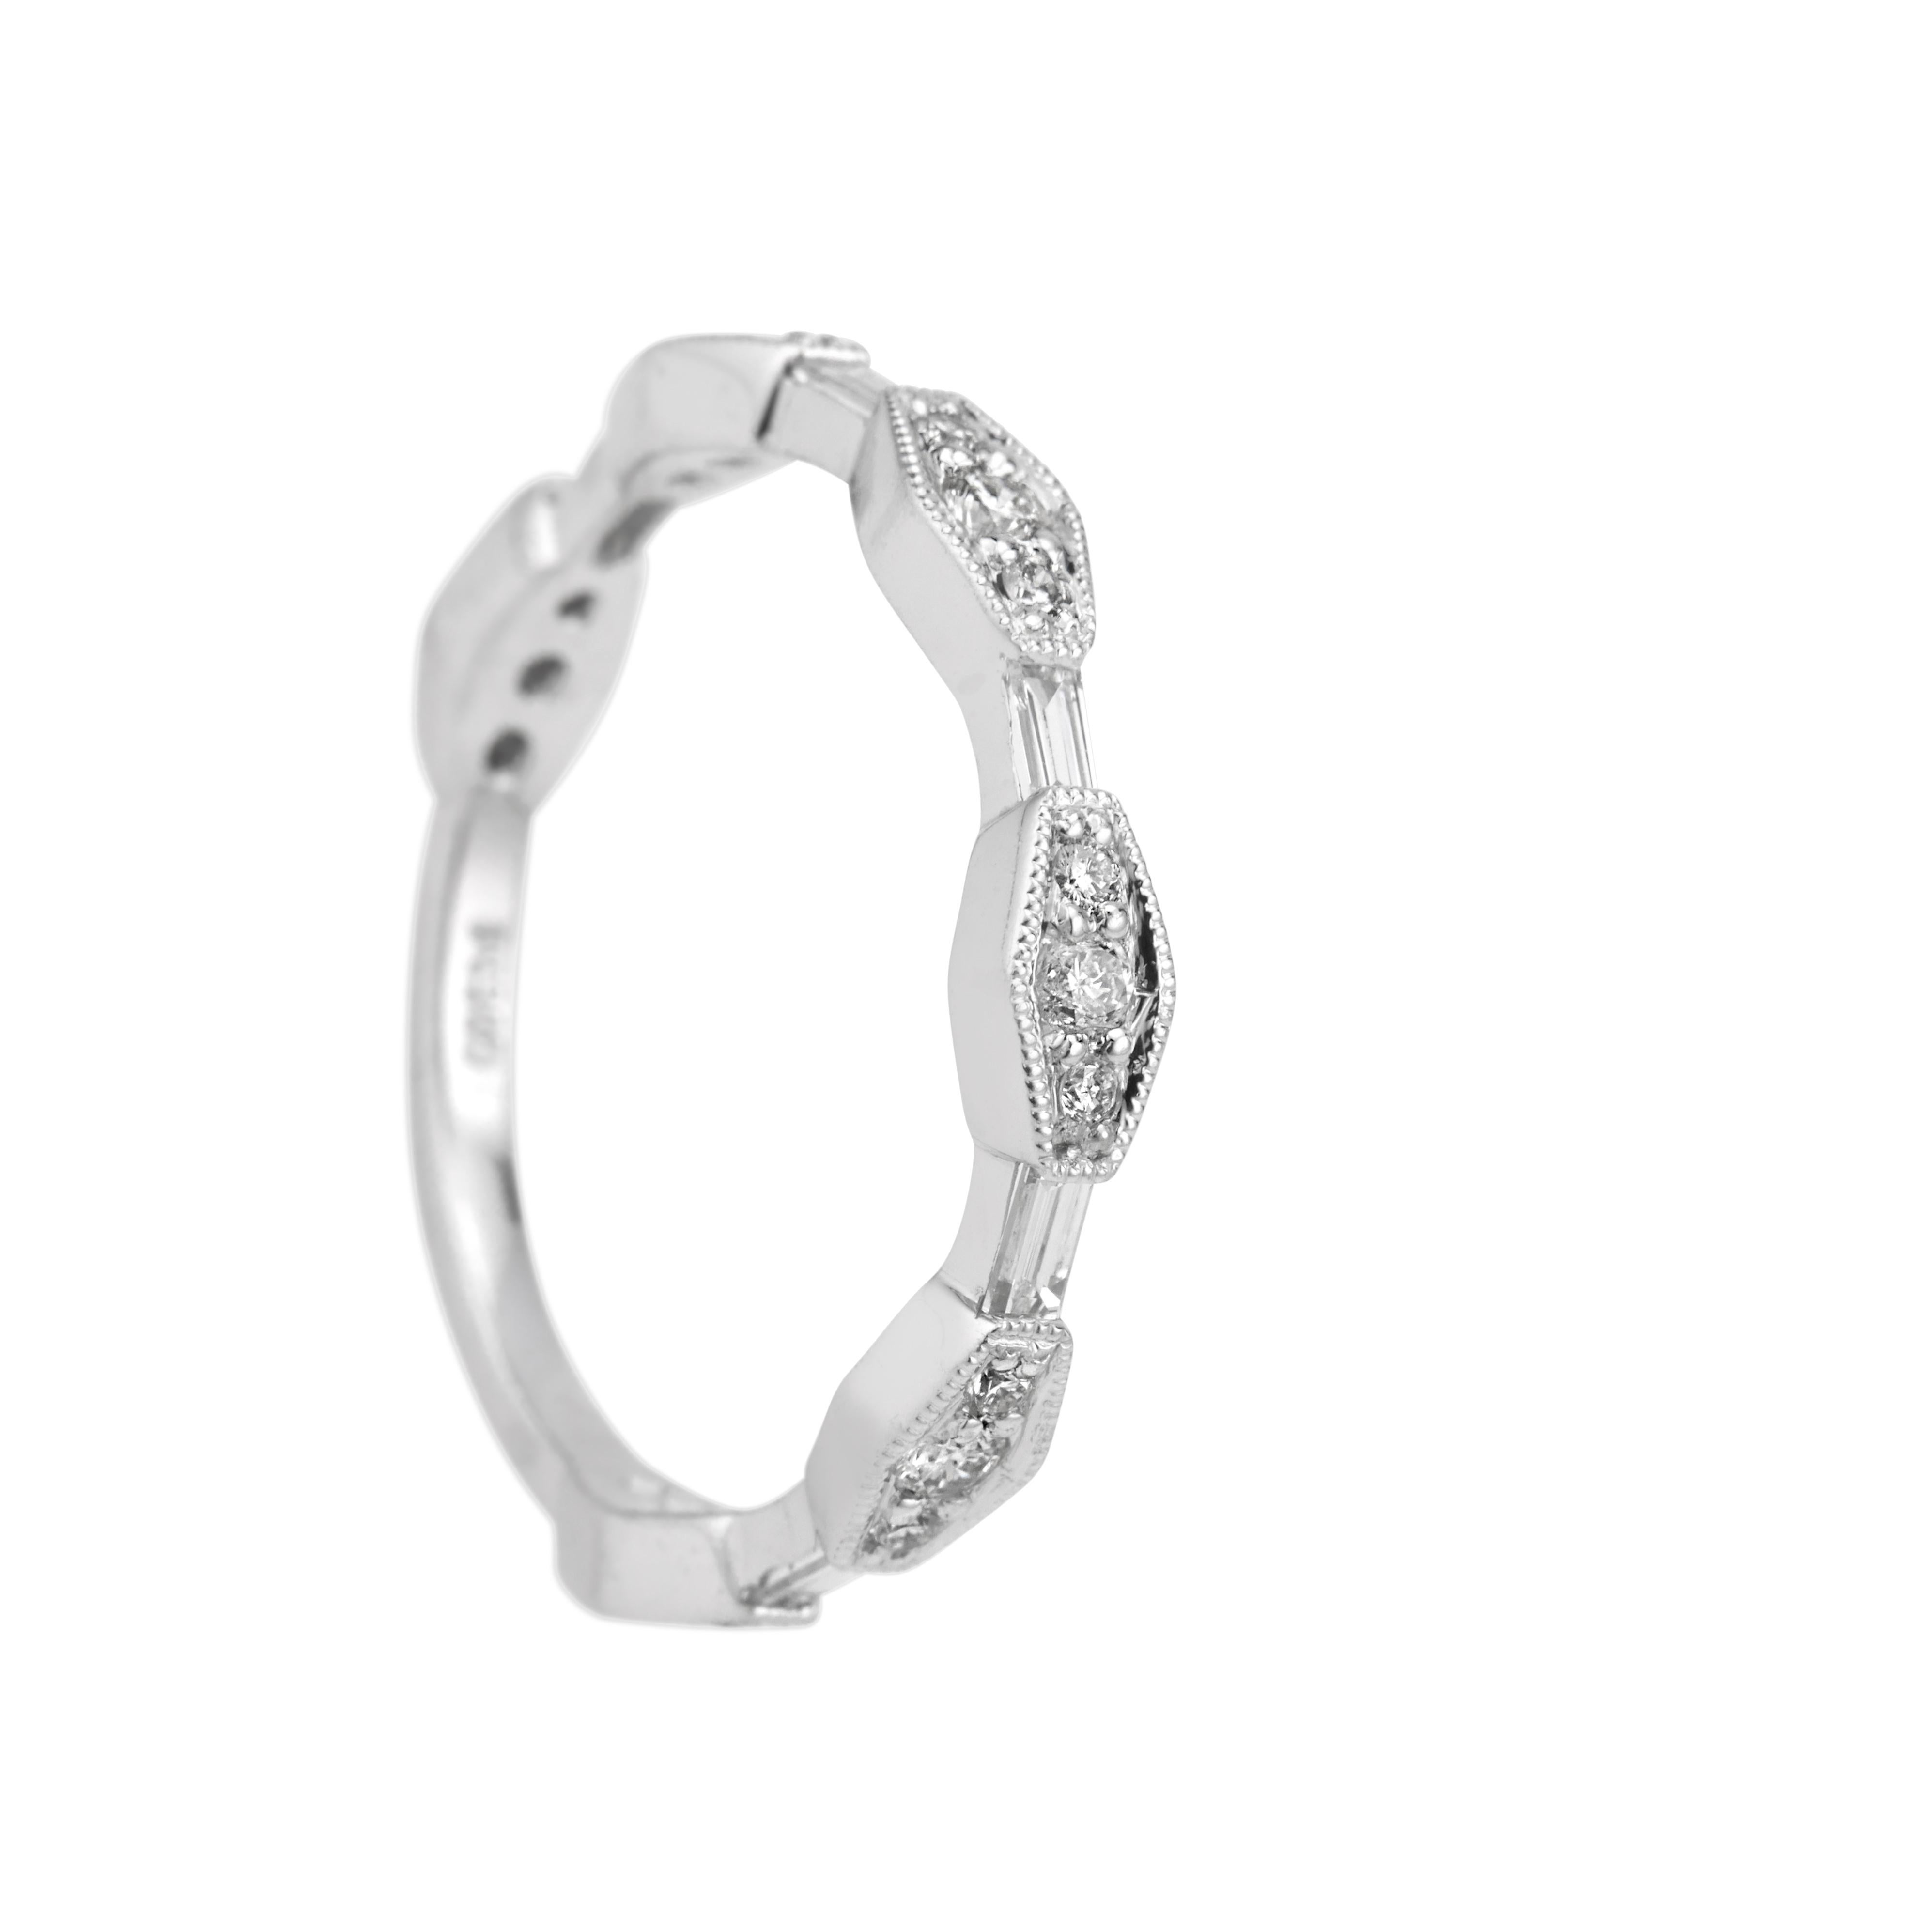 Diamond wedding band ring. 3/4 of the way around. Five baguette diamonds are separated by six groups of three round diamonds. Designed and crafted in the Peter Suchy workshop

18 round brilliant cut diamonds, G VS approx. .25cts 
5 straight cut